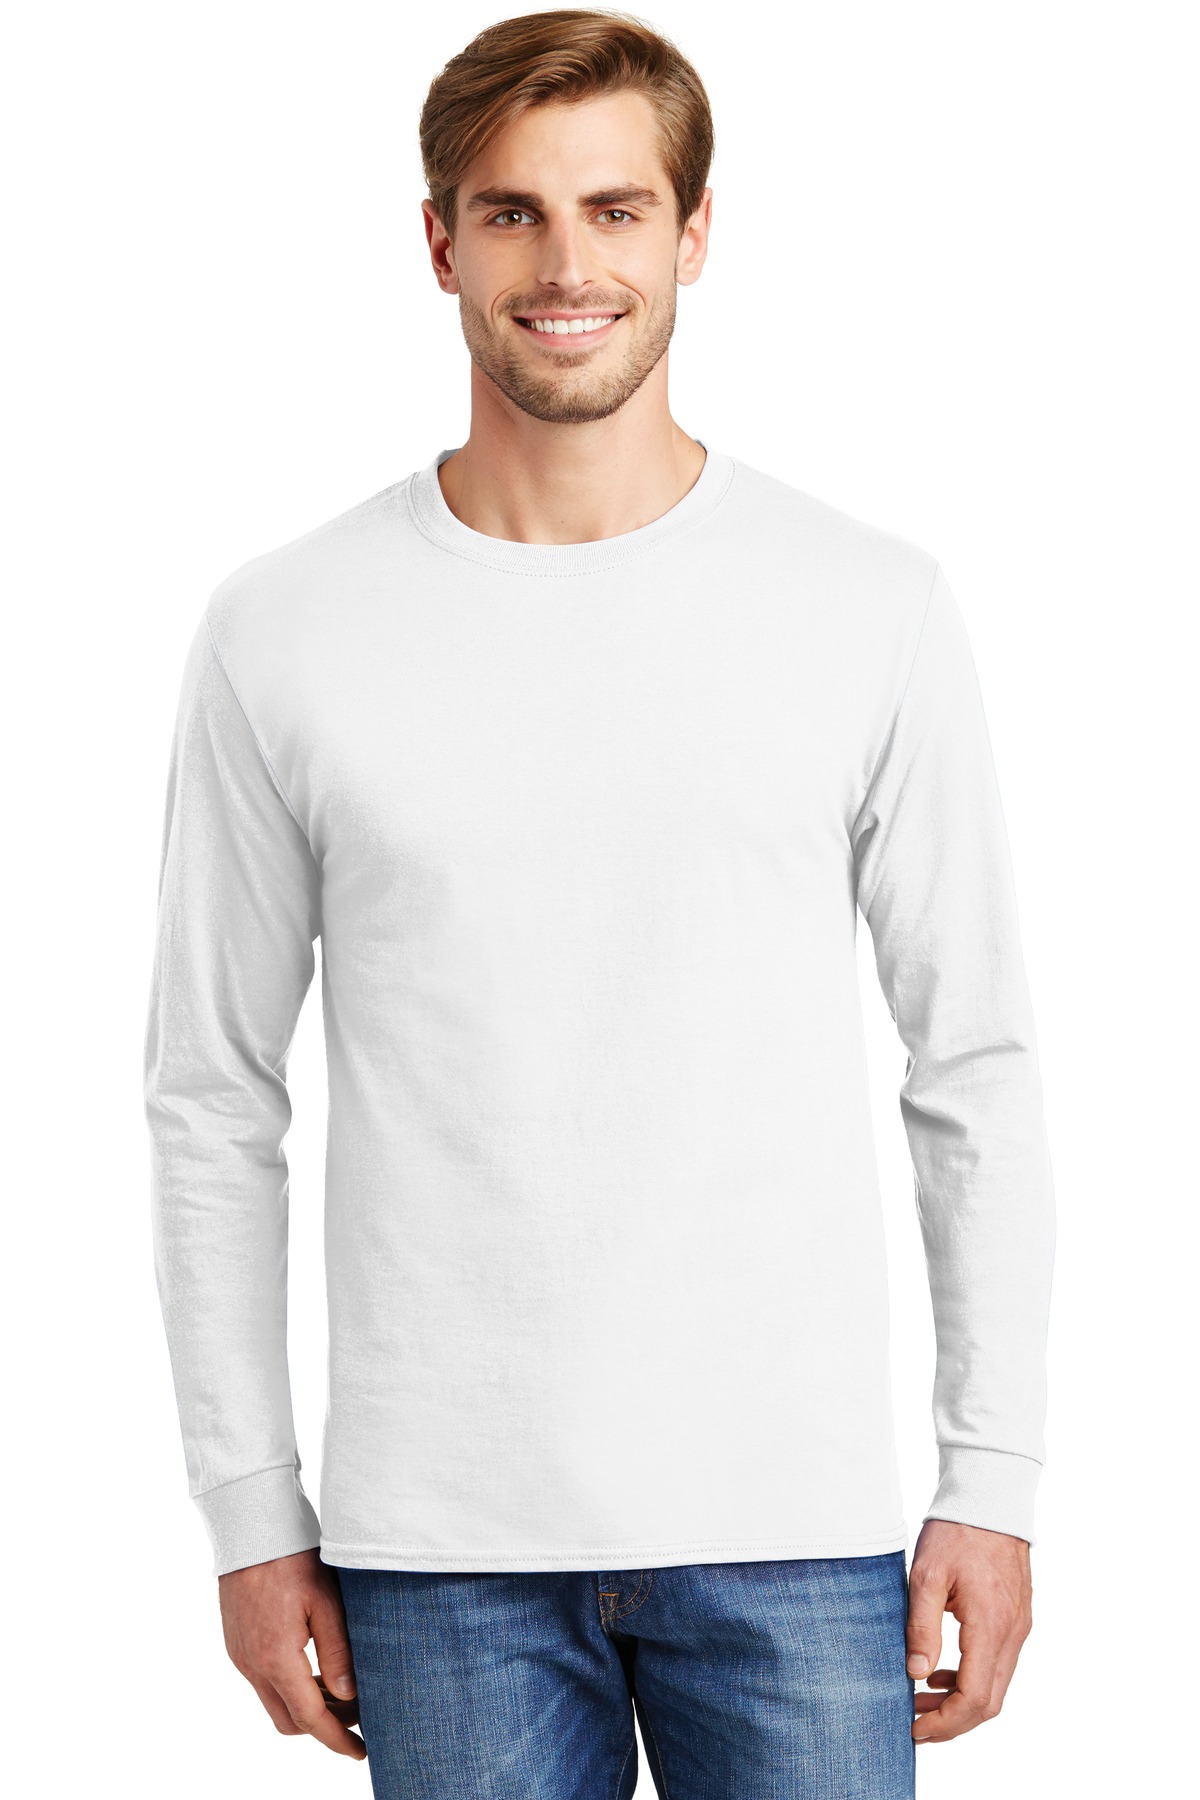 Buy Hanes - Authentic 100% Cotton Long Sleeve T-Shirt. - Hanes Online ...